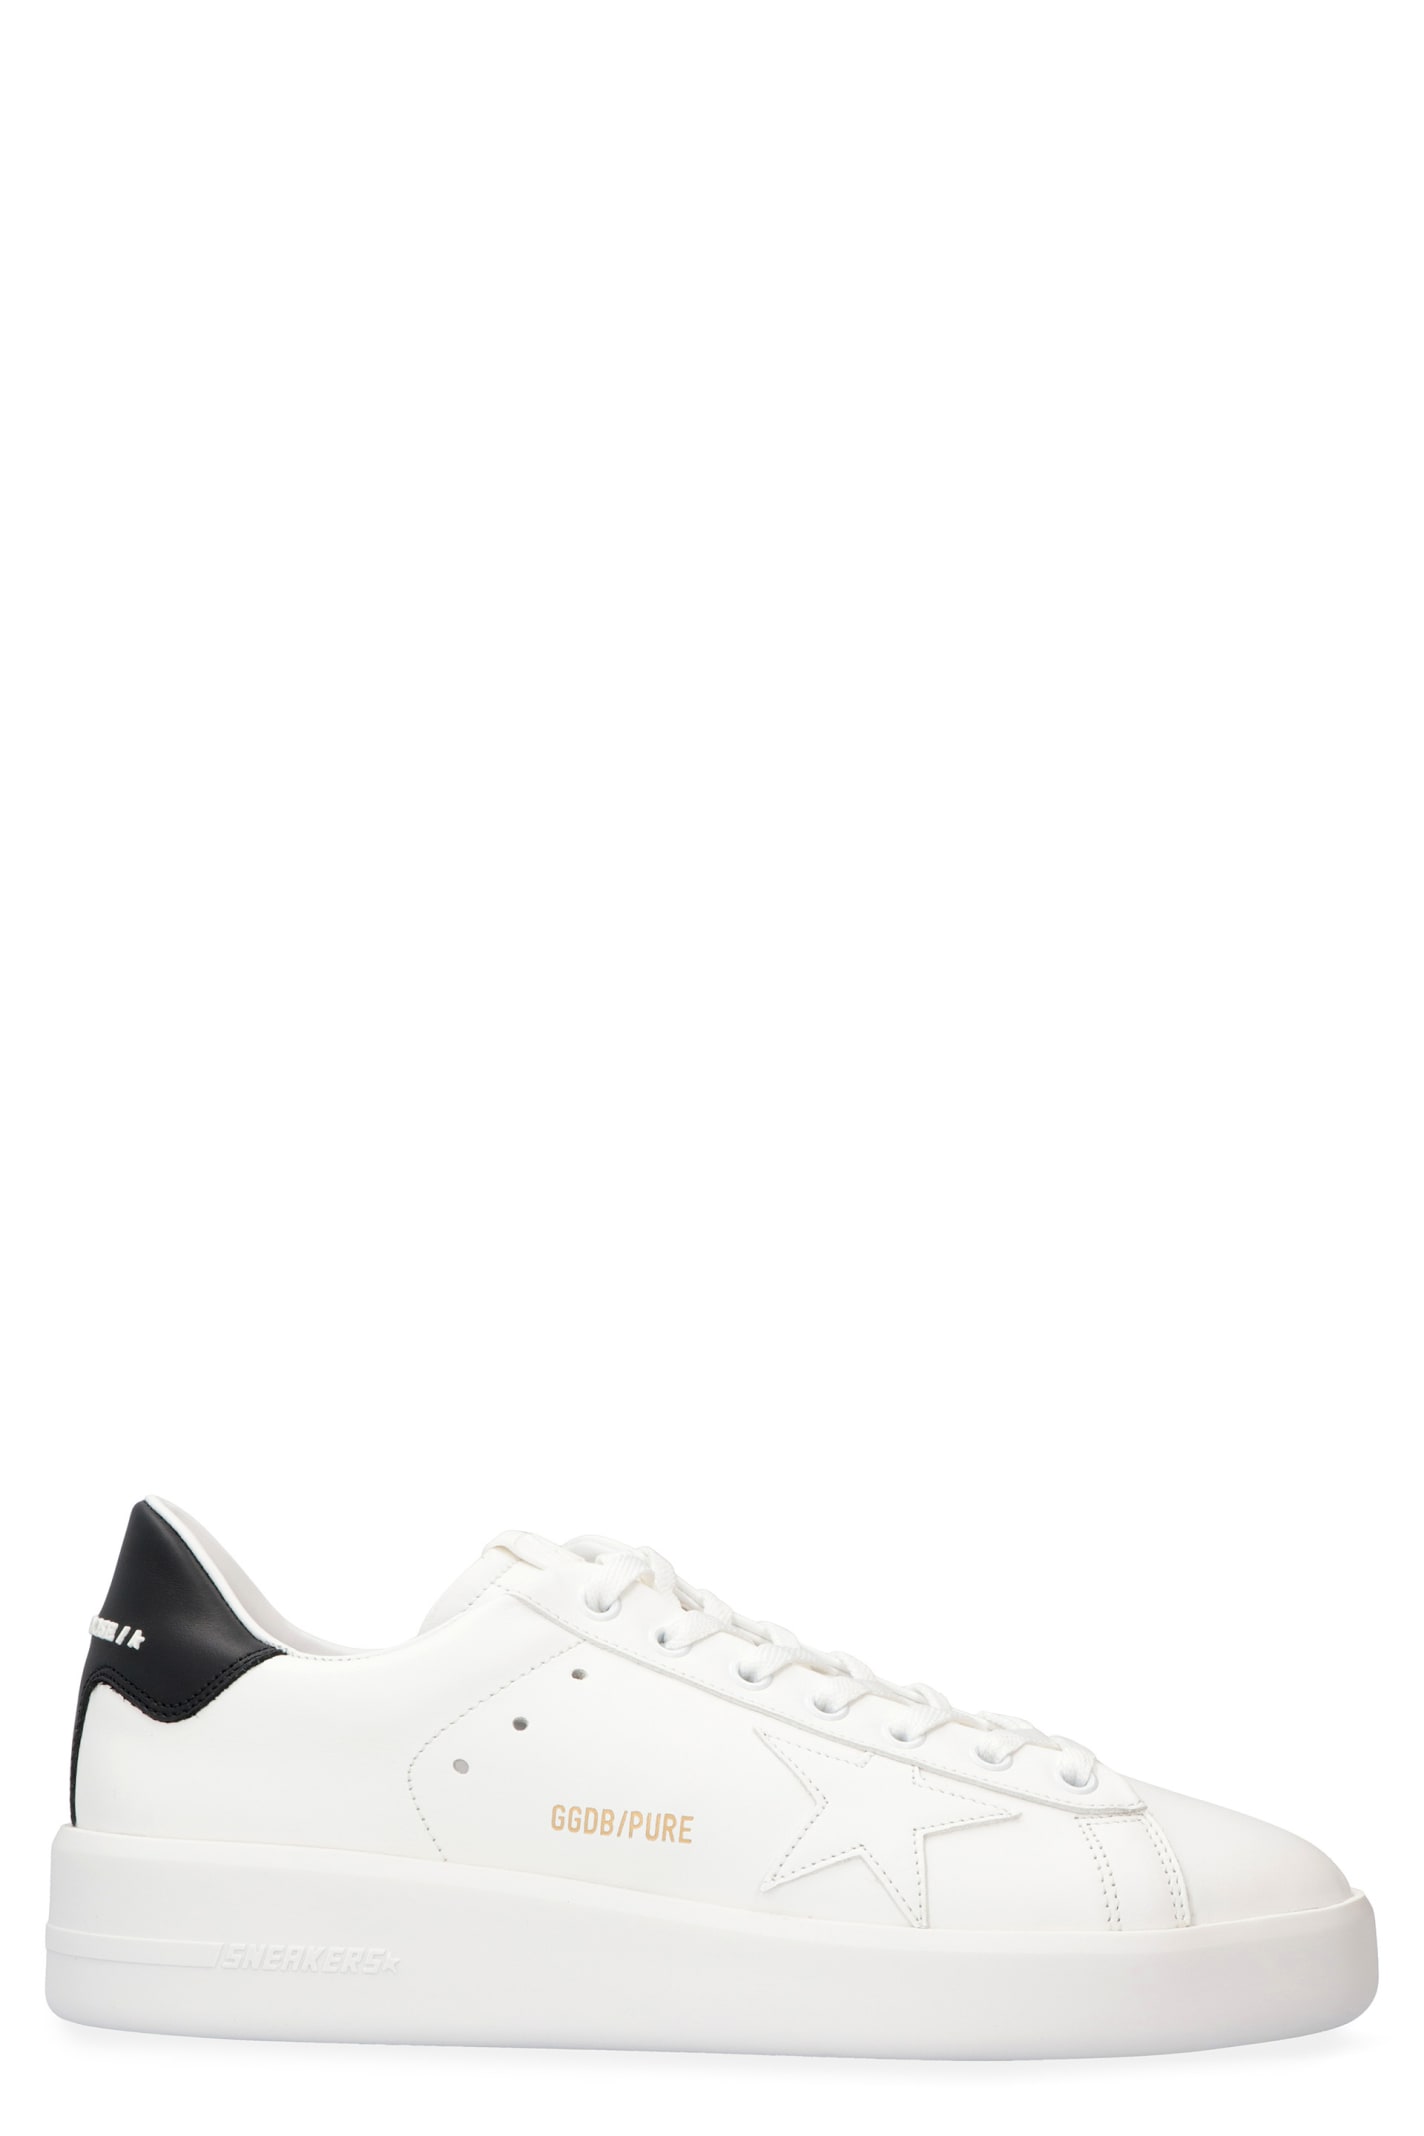 Shop Golden Goose Pure Star Leather Low-top Sneakers